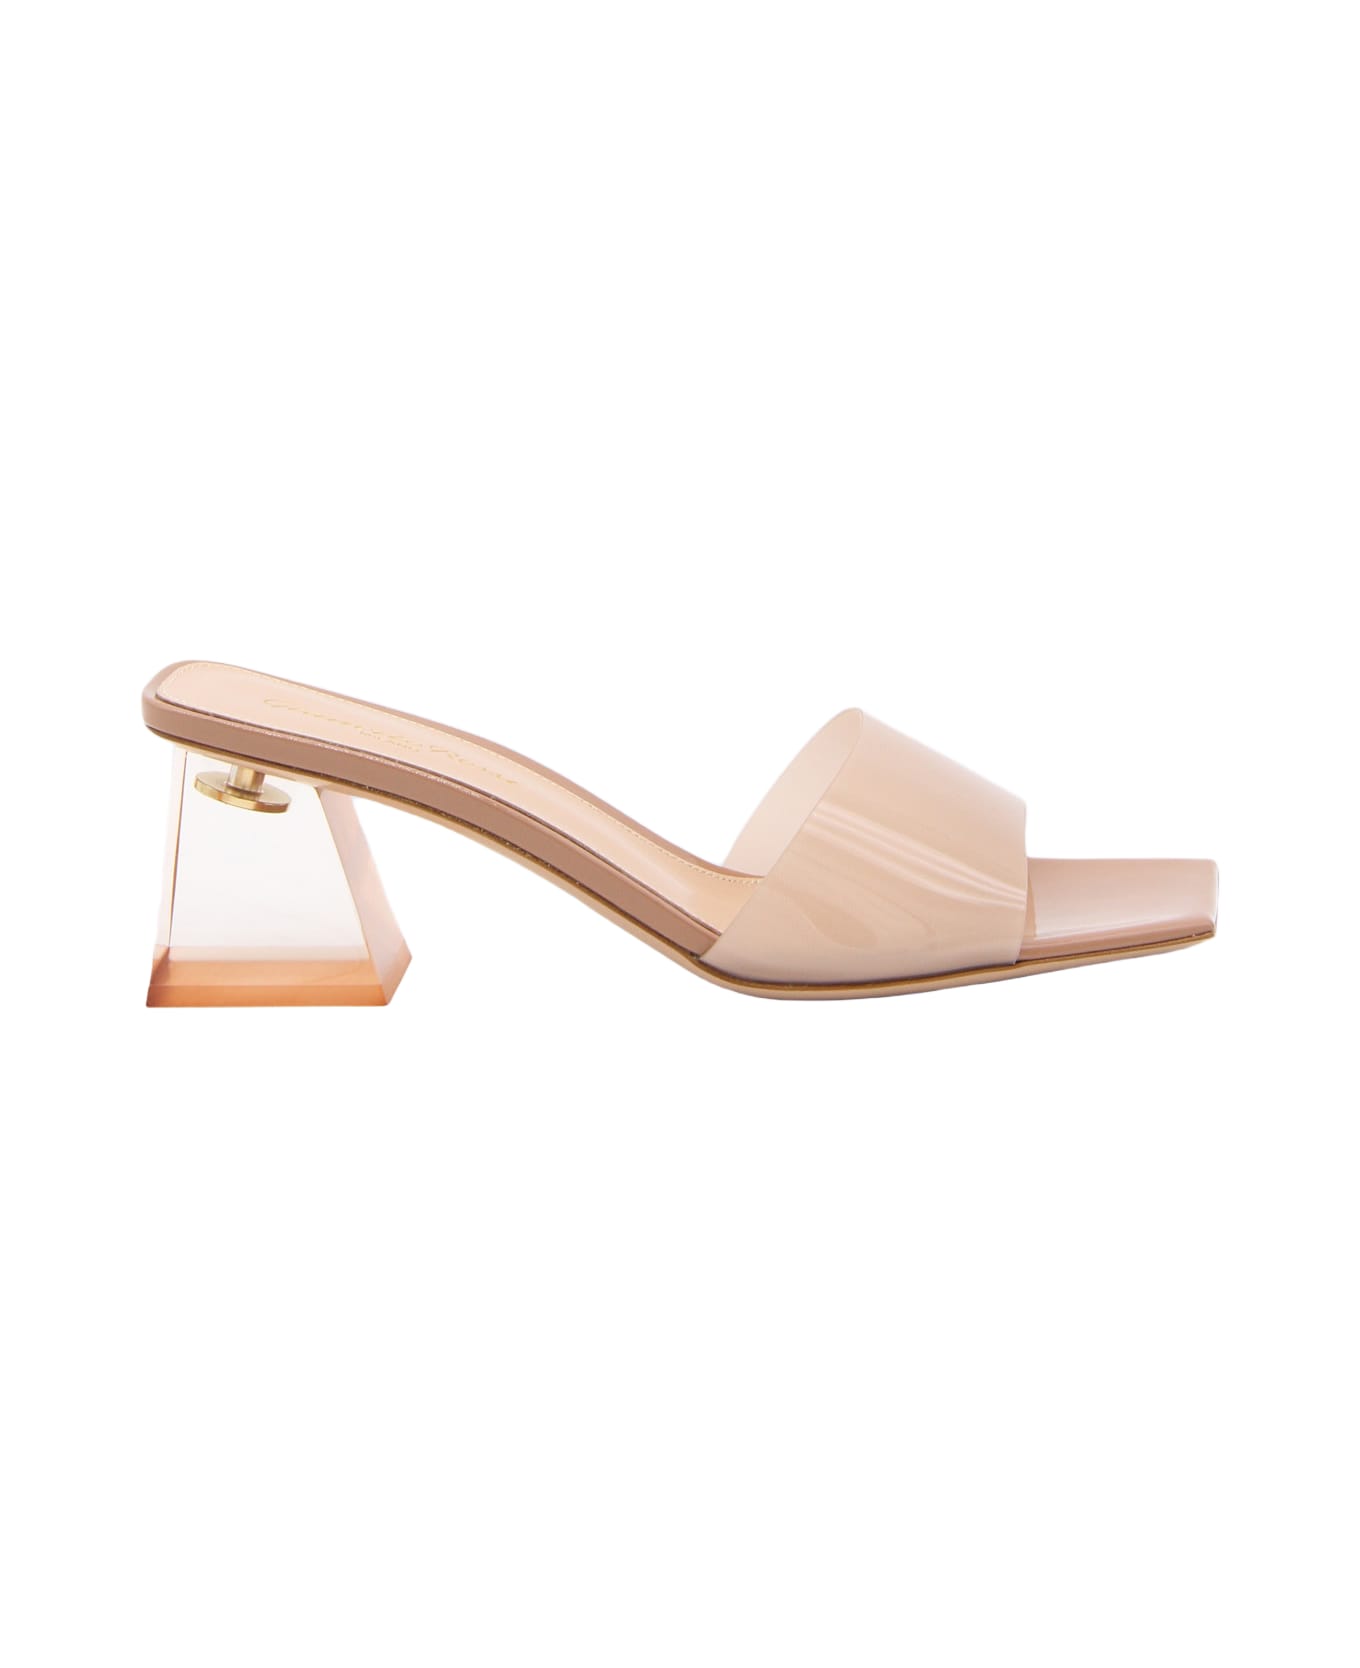 Gianvito Rossi Beige Pvc And Leather Cosmic Sandals - PRALINE